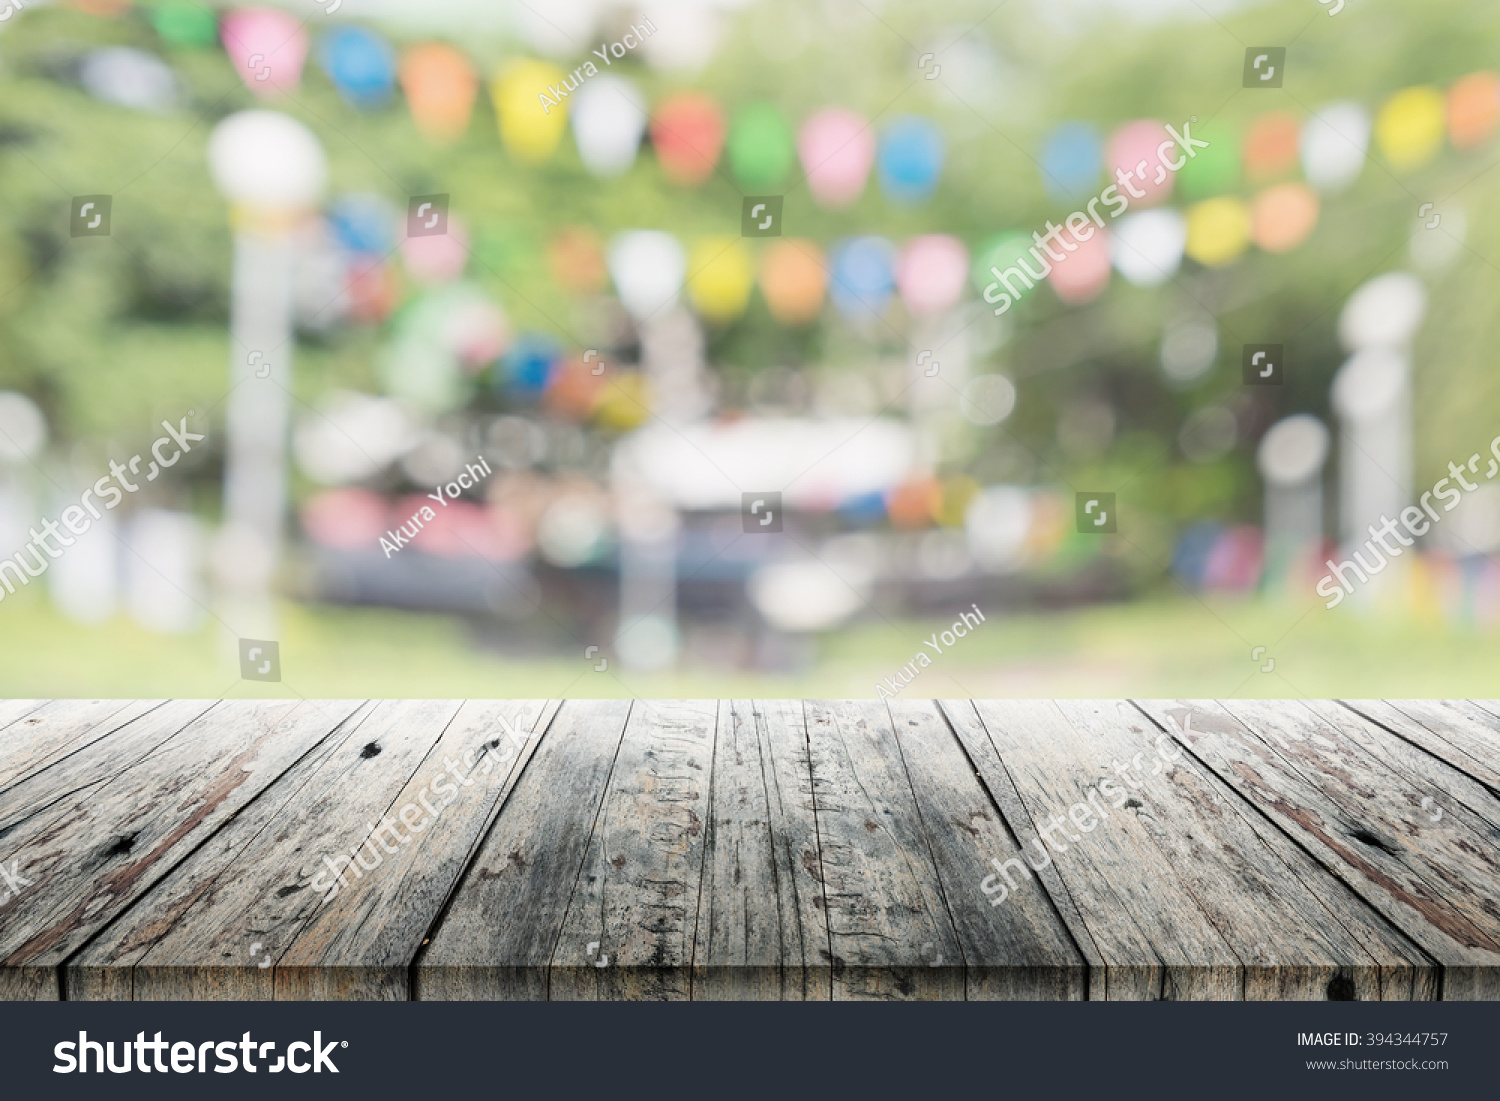 Empty Wooden Table Blurred Party On Stock Photo 394344757 | Shutterstock